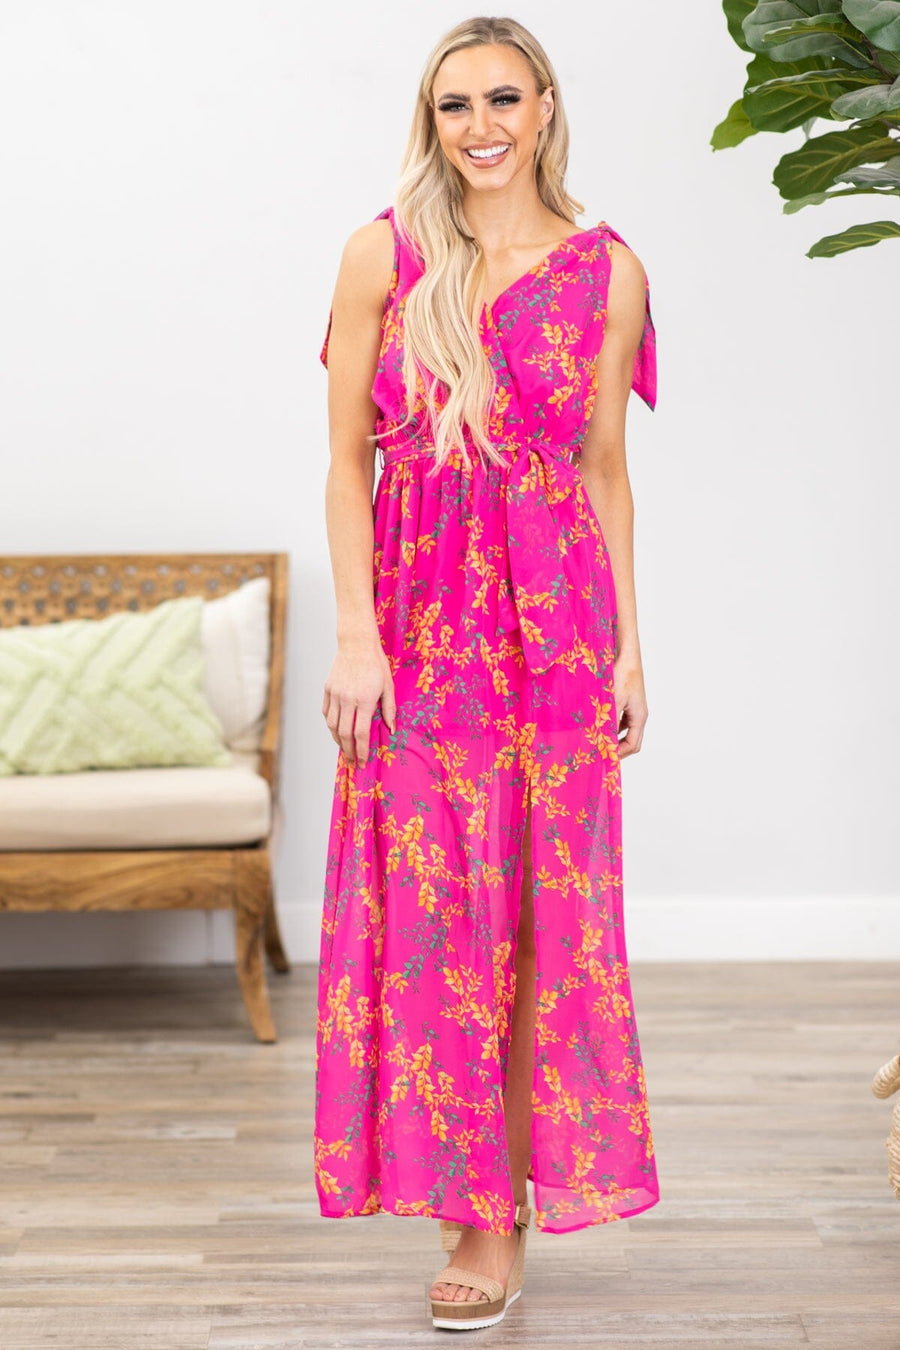 Hot Pink Floral Print Surplice Front Maxi Dress - Filly Flair